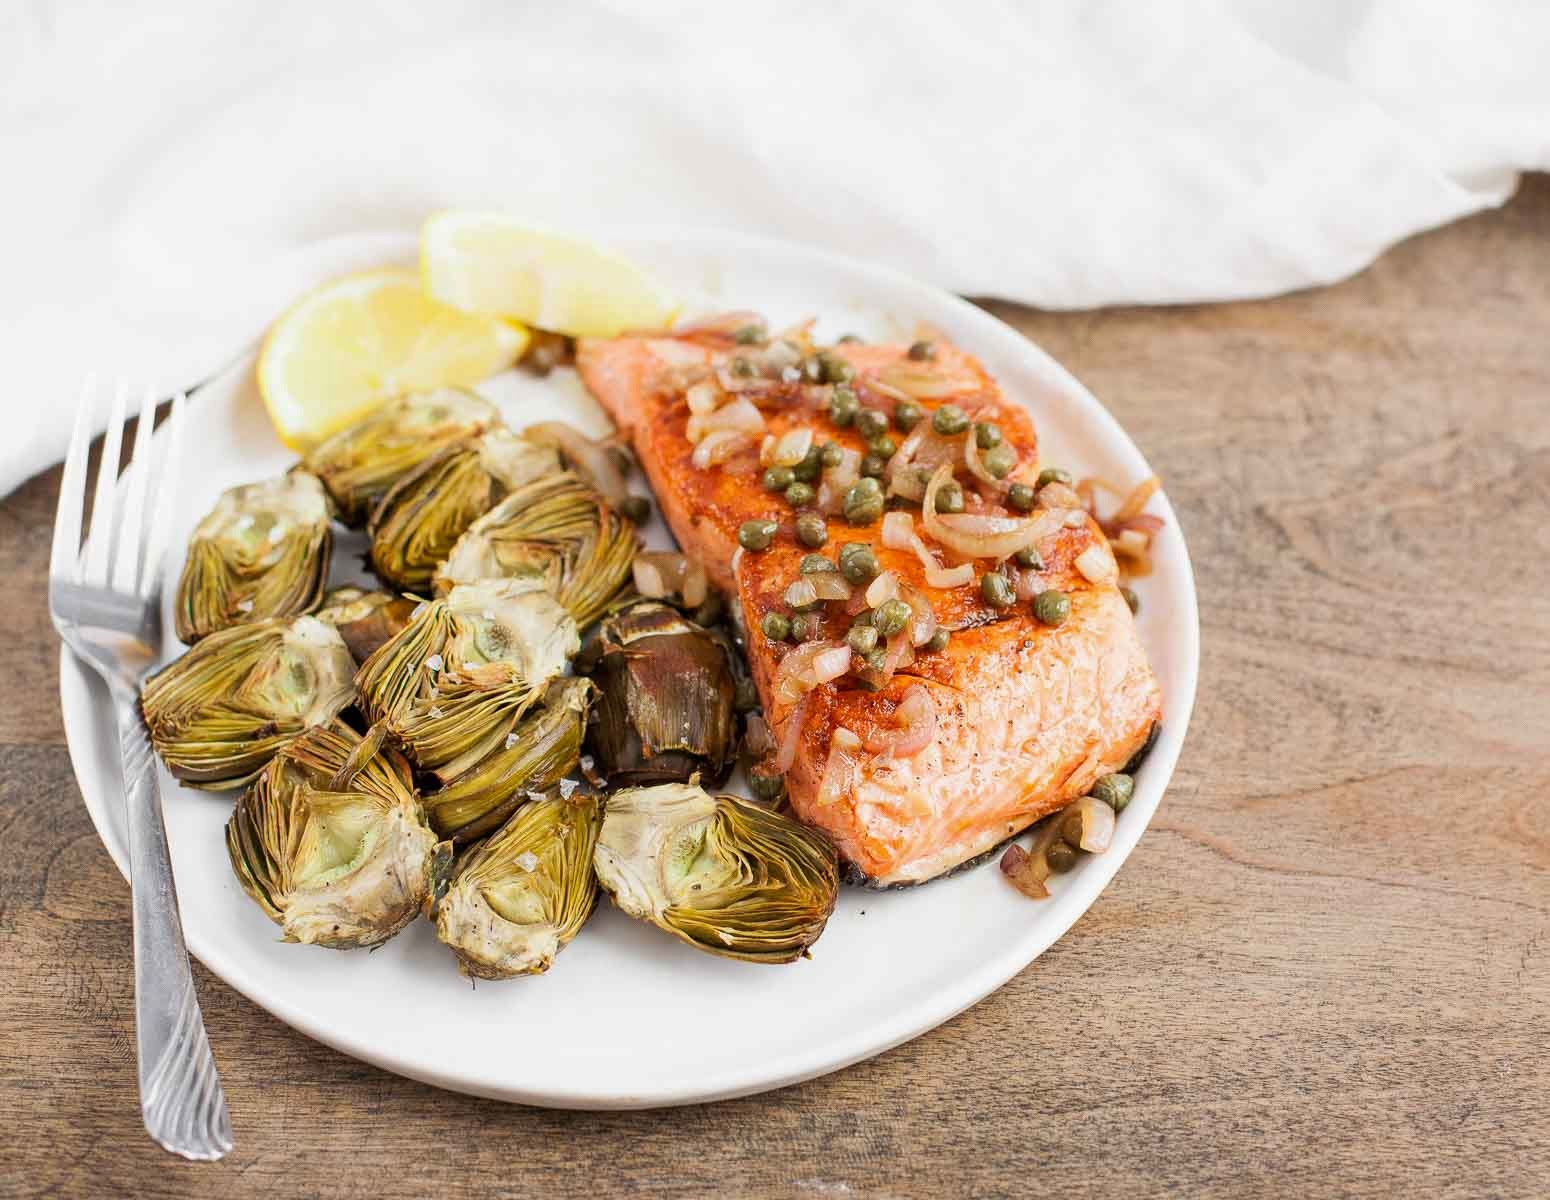 Pan-Seared Salmon with Capers and Baby Artichokes | acalculatedwhisk.com A delicious paleo meal that takes less than 30 minutes to make!